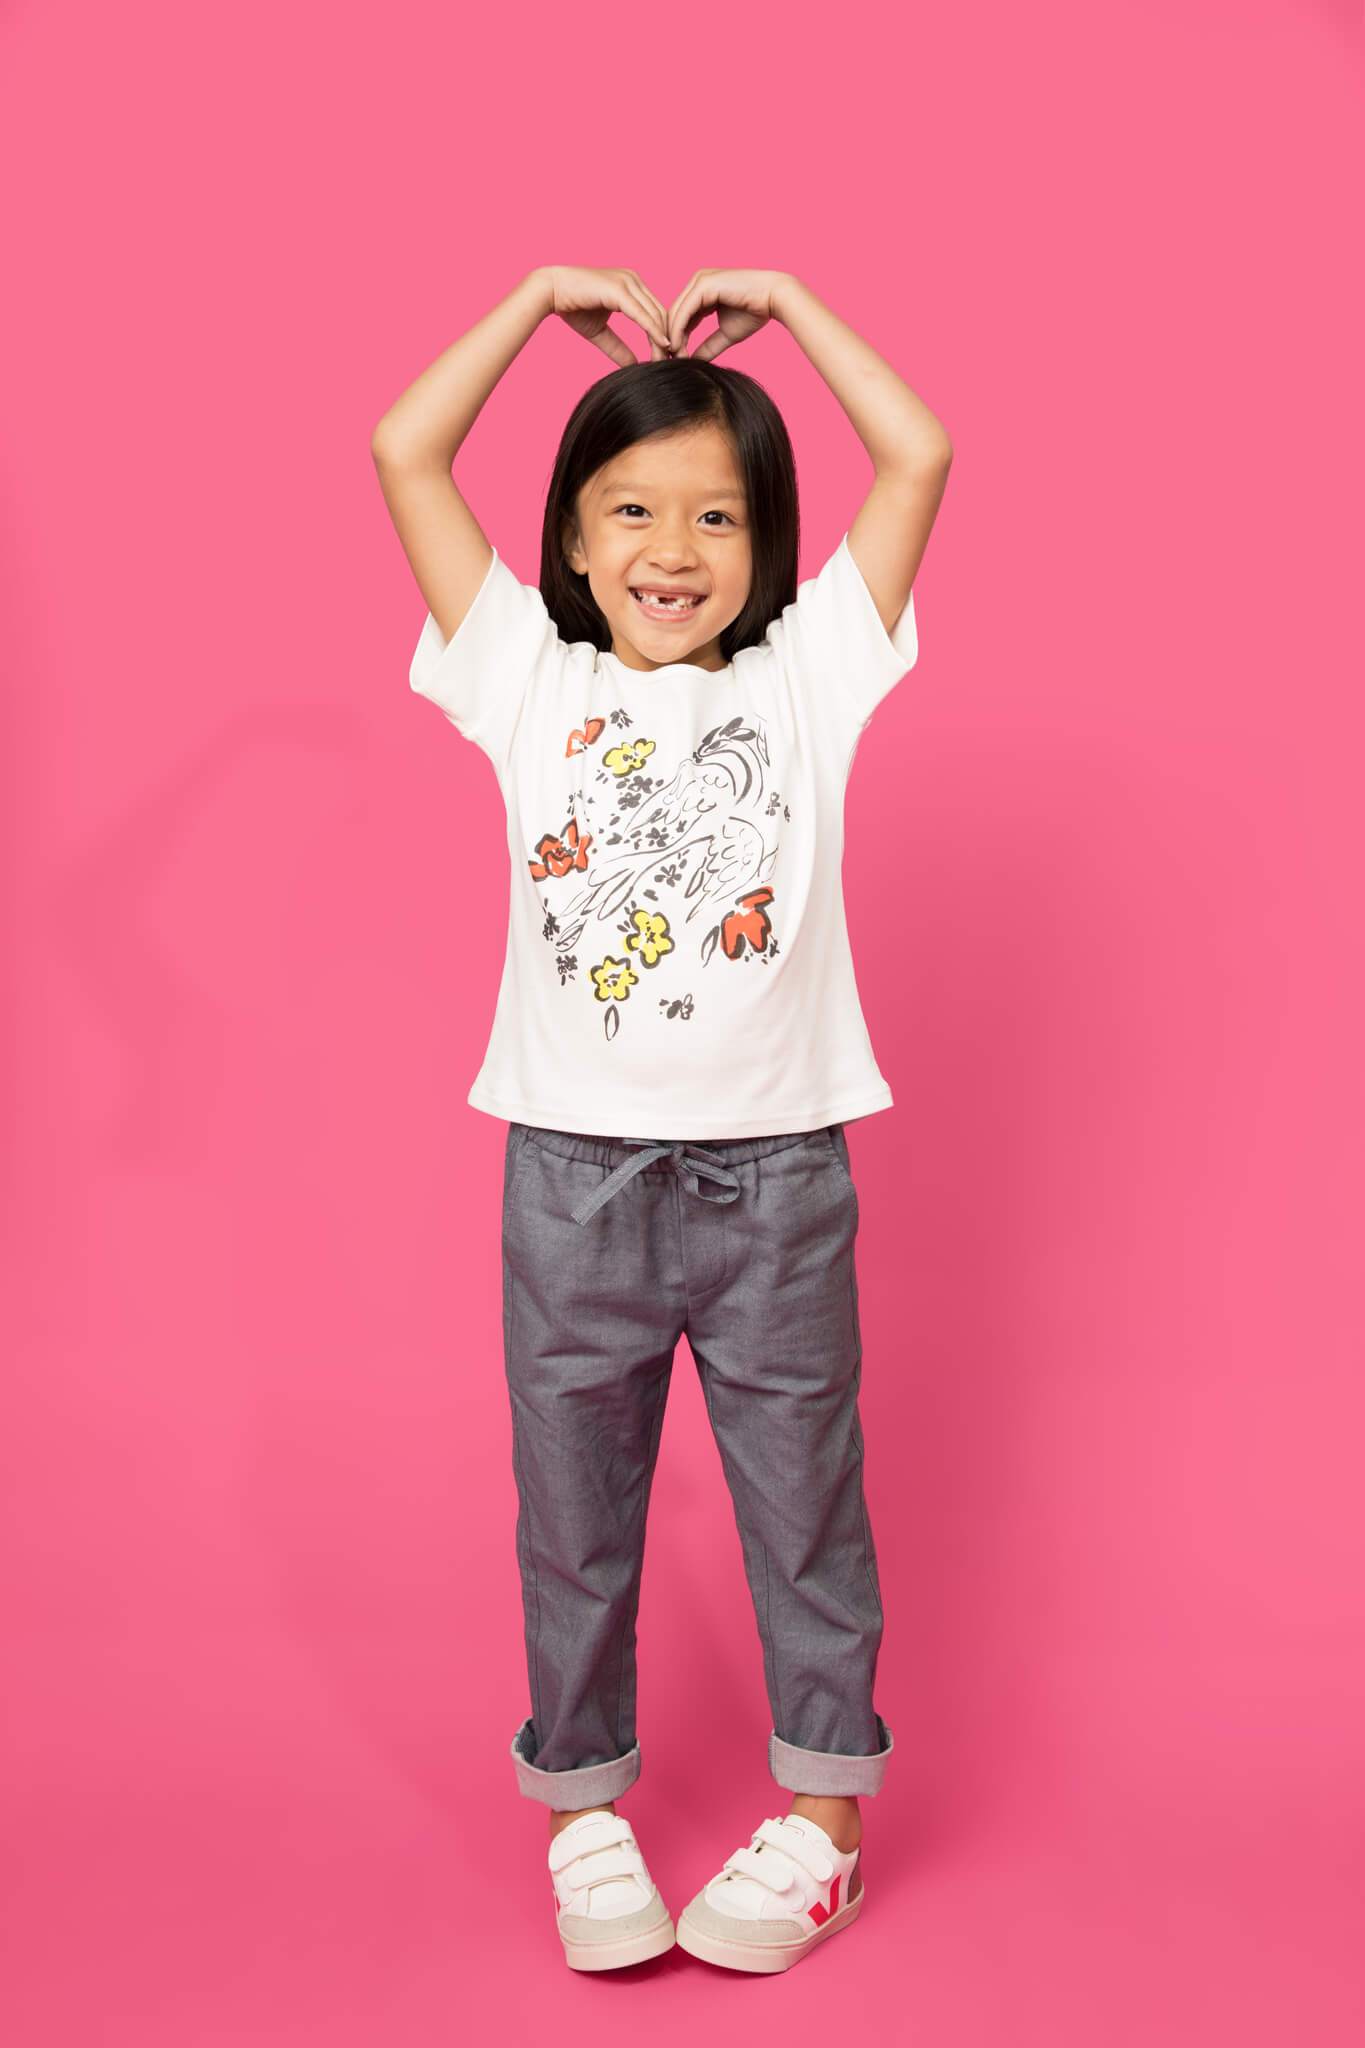 Kids pants. Hip and stylish, 100% organic cotton denim. Made in NYC. Unisex. 